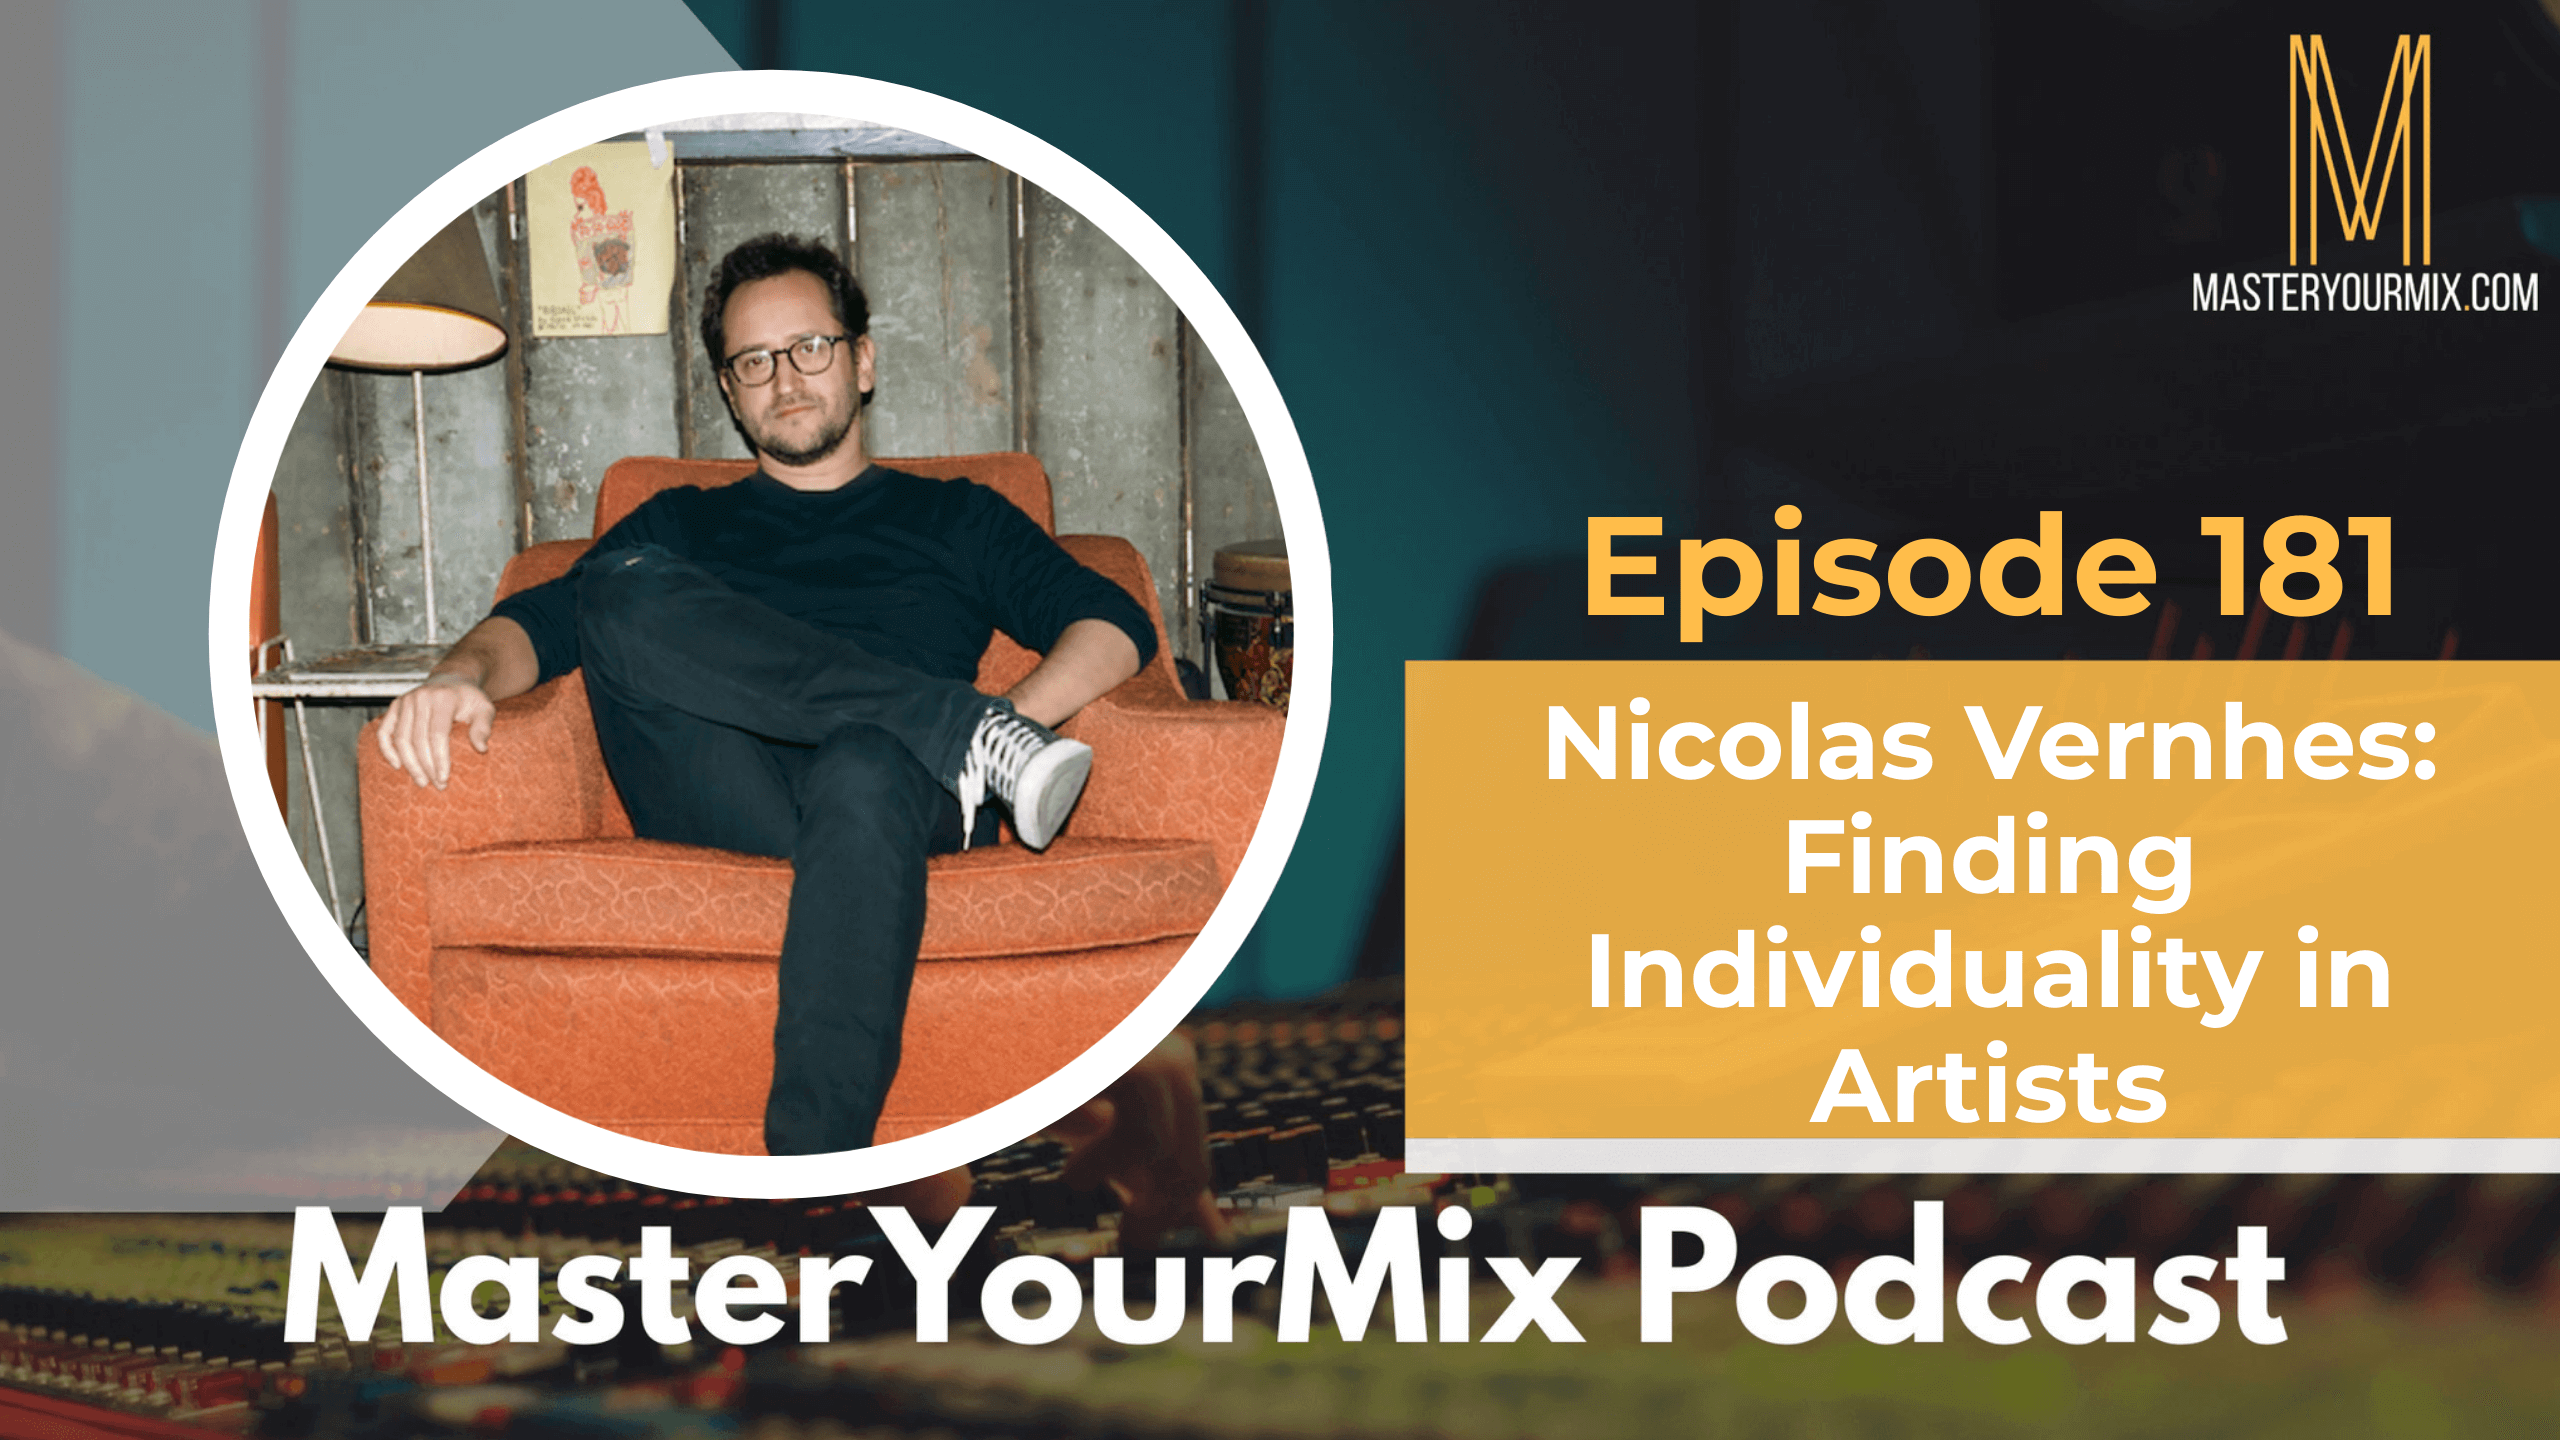 master your mix podcast, ep 181 nicolas vernhes